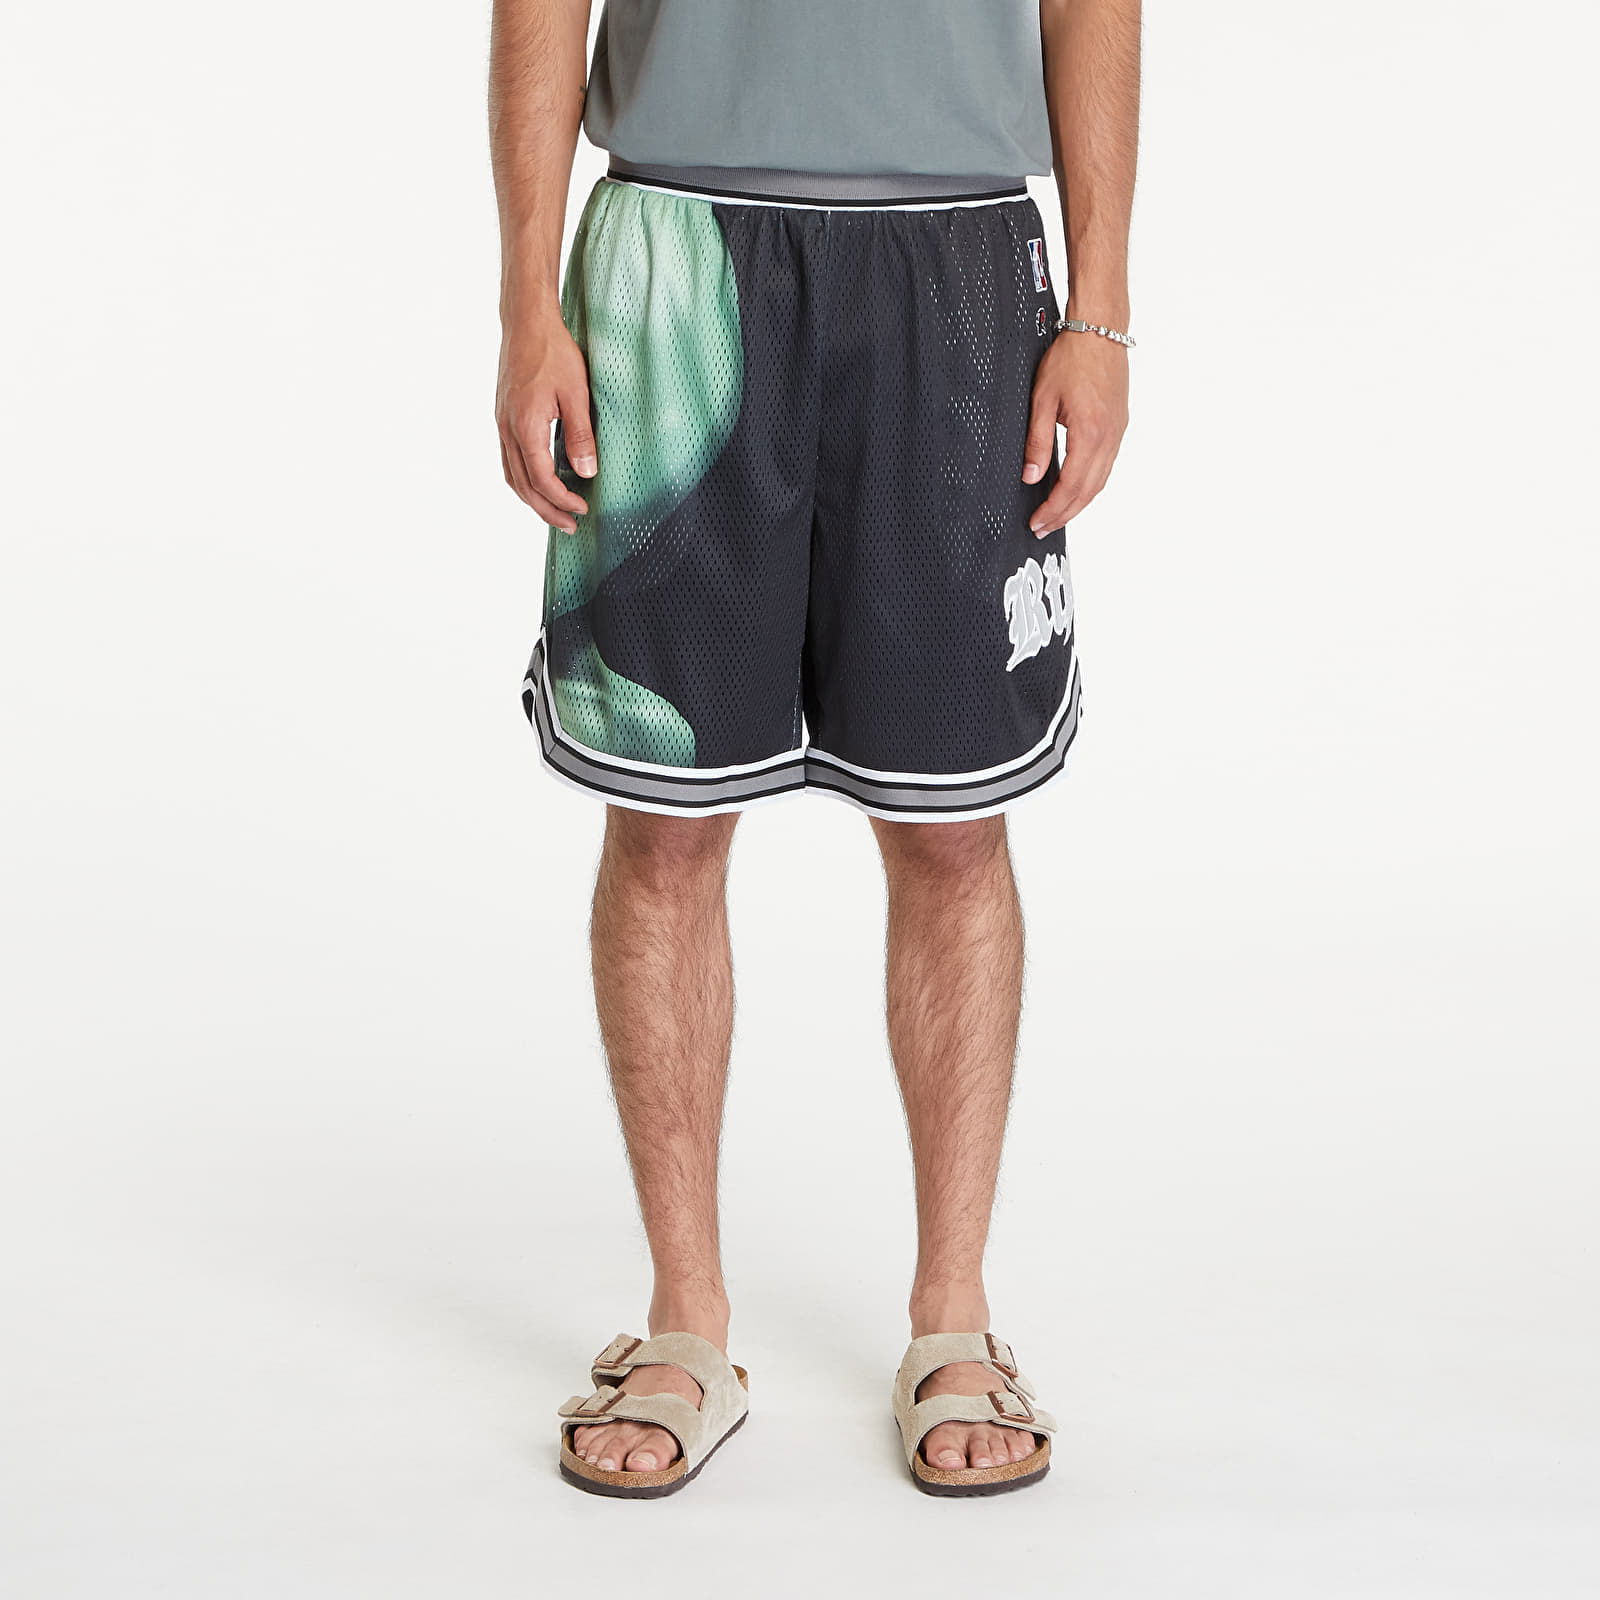 We Come In Peace Basketball Shorts Black